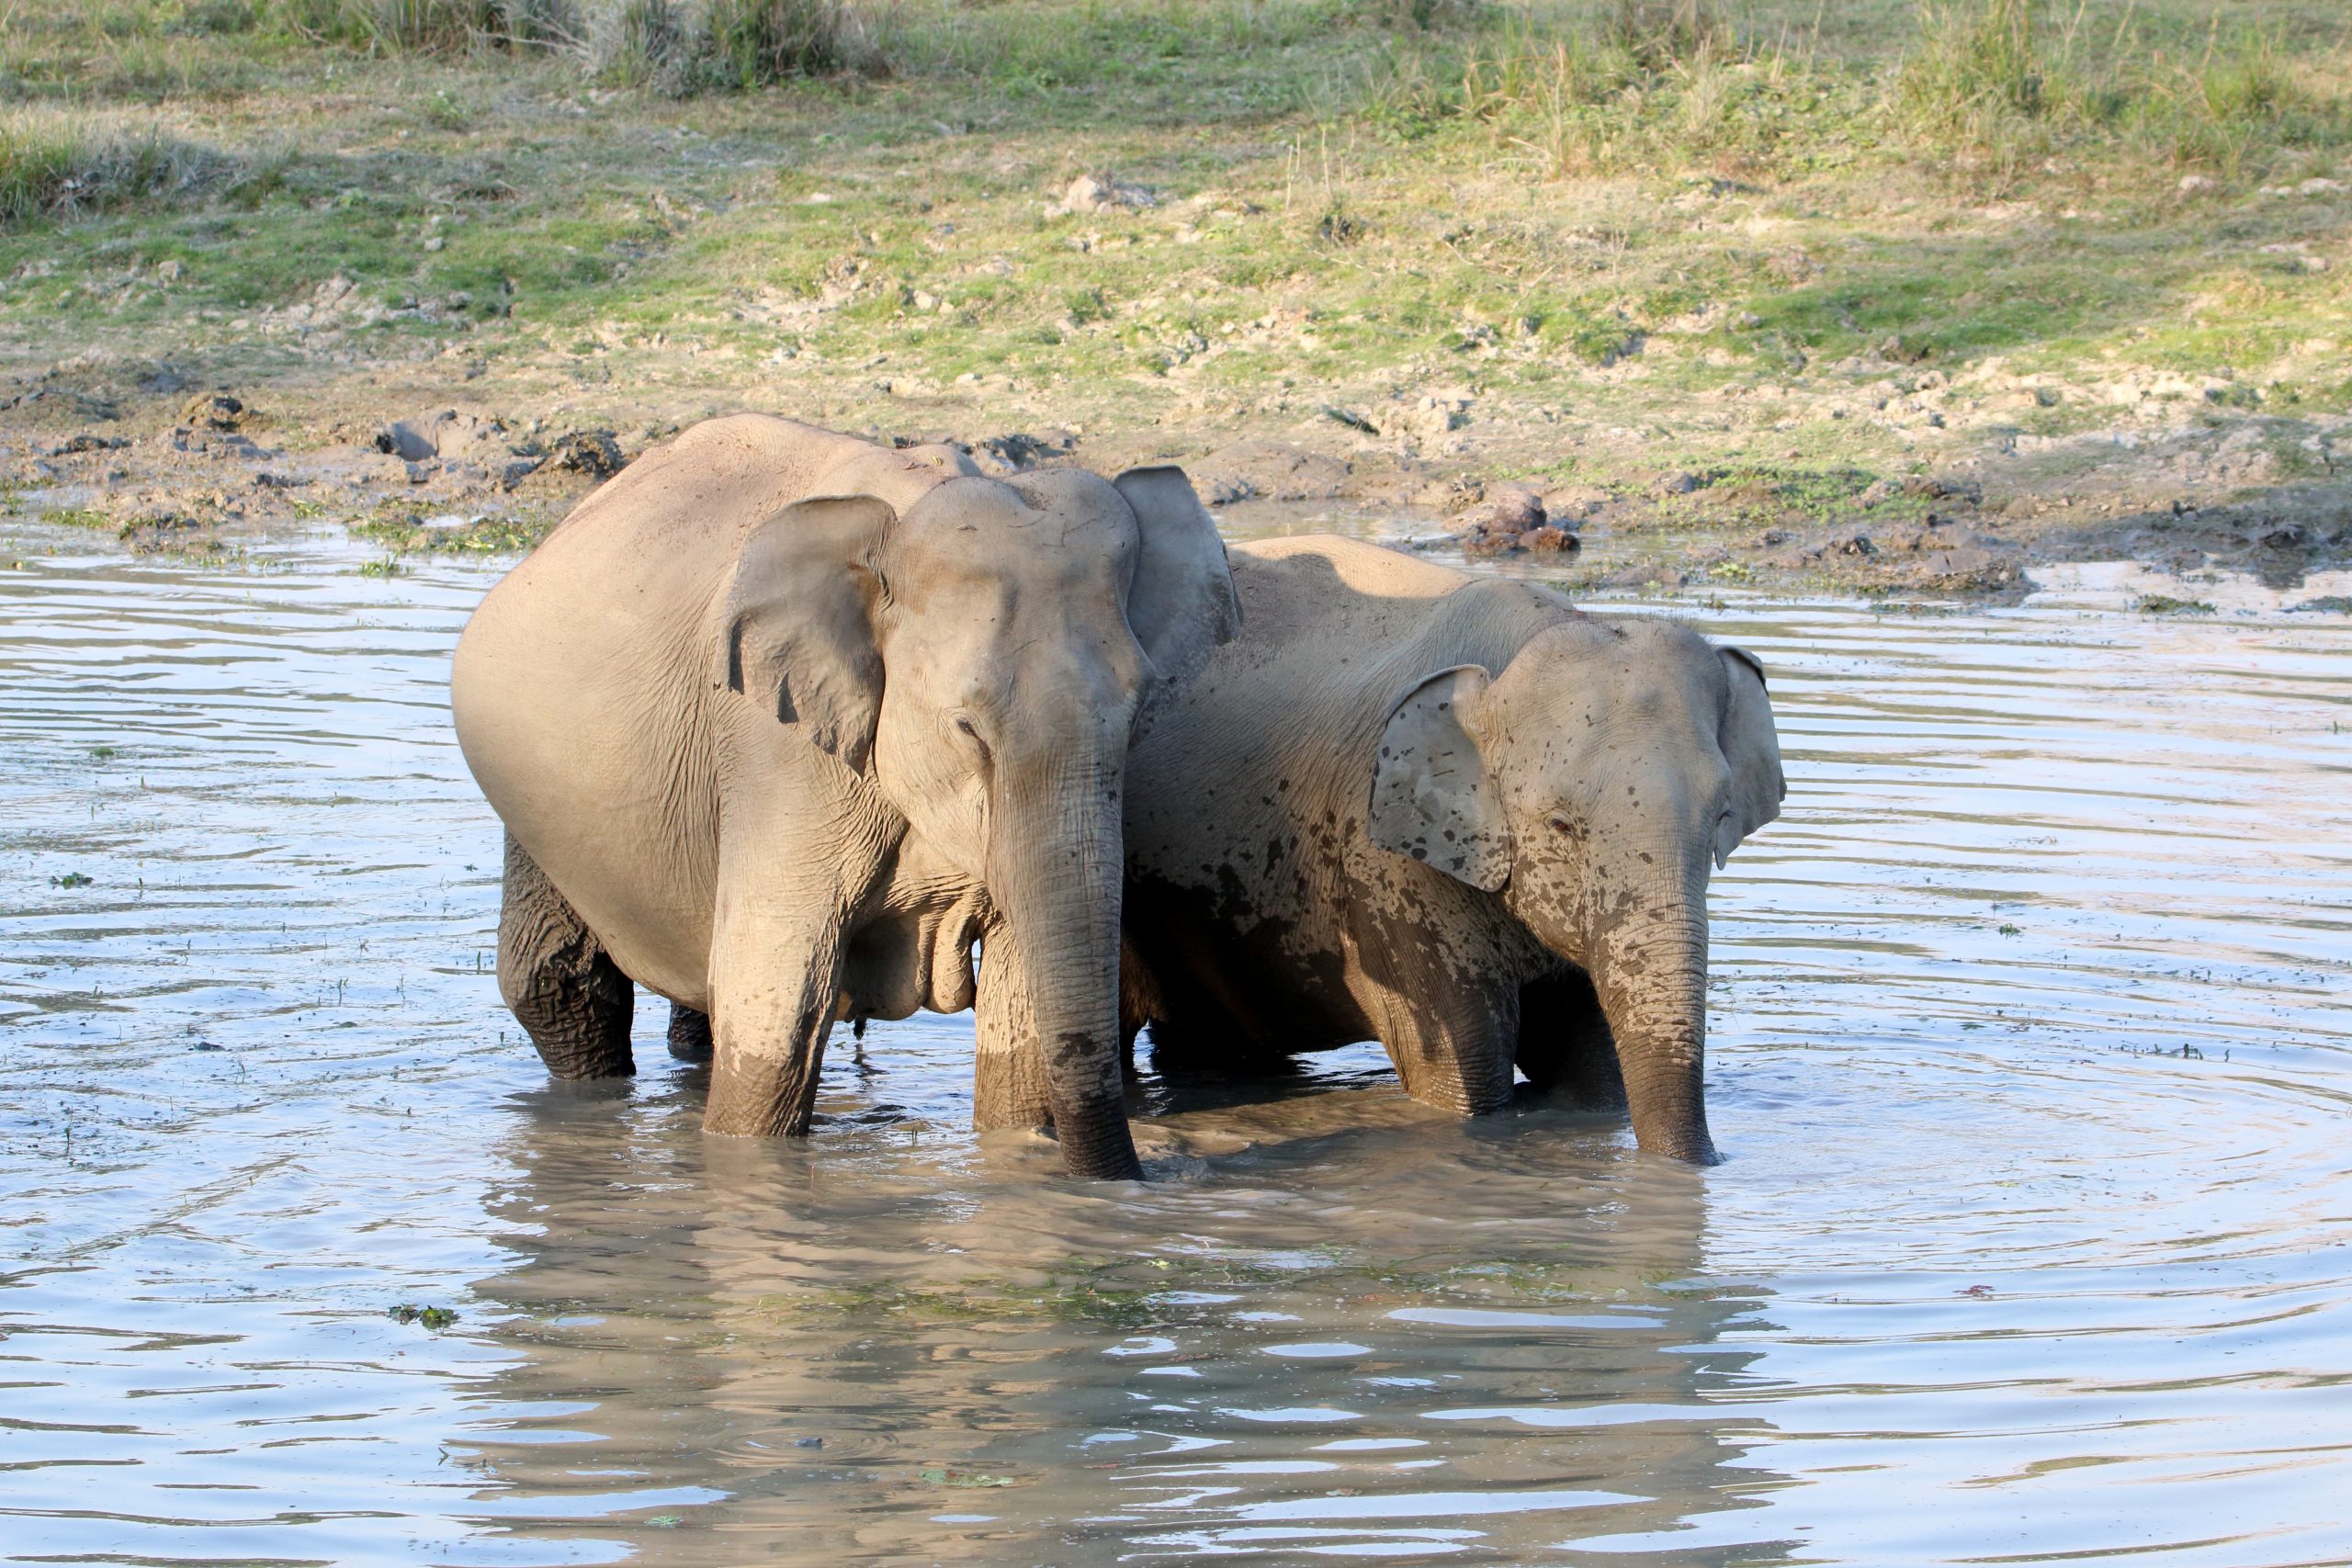 A pair of elephants in river